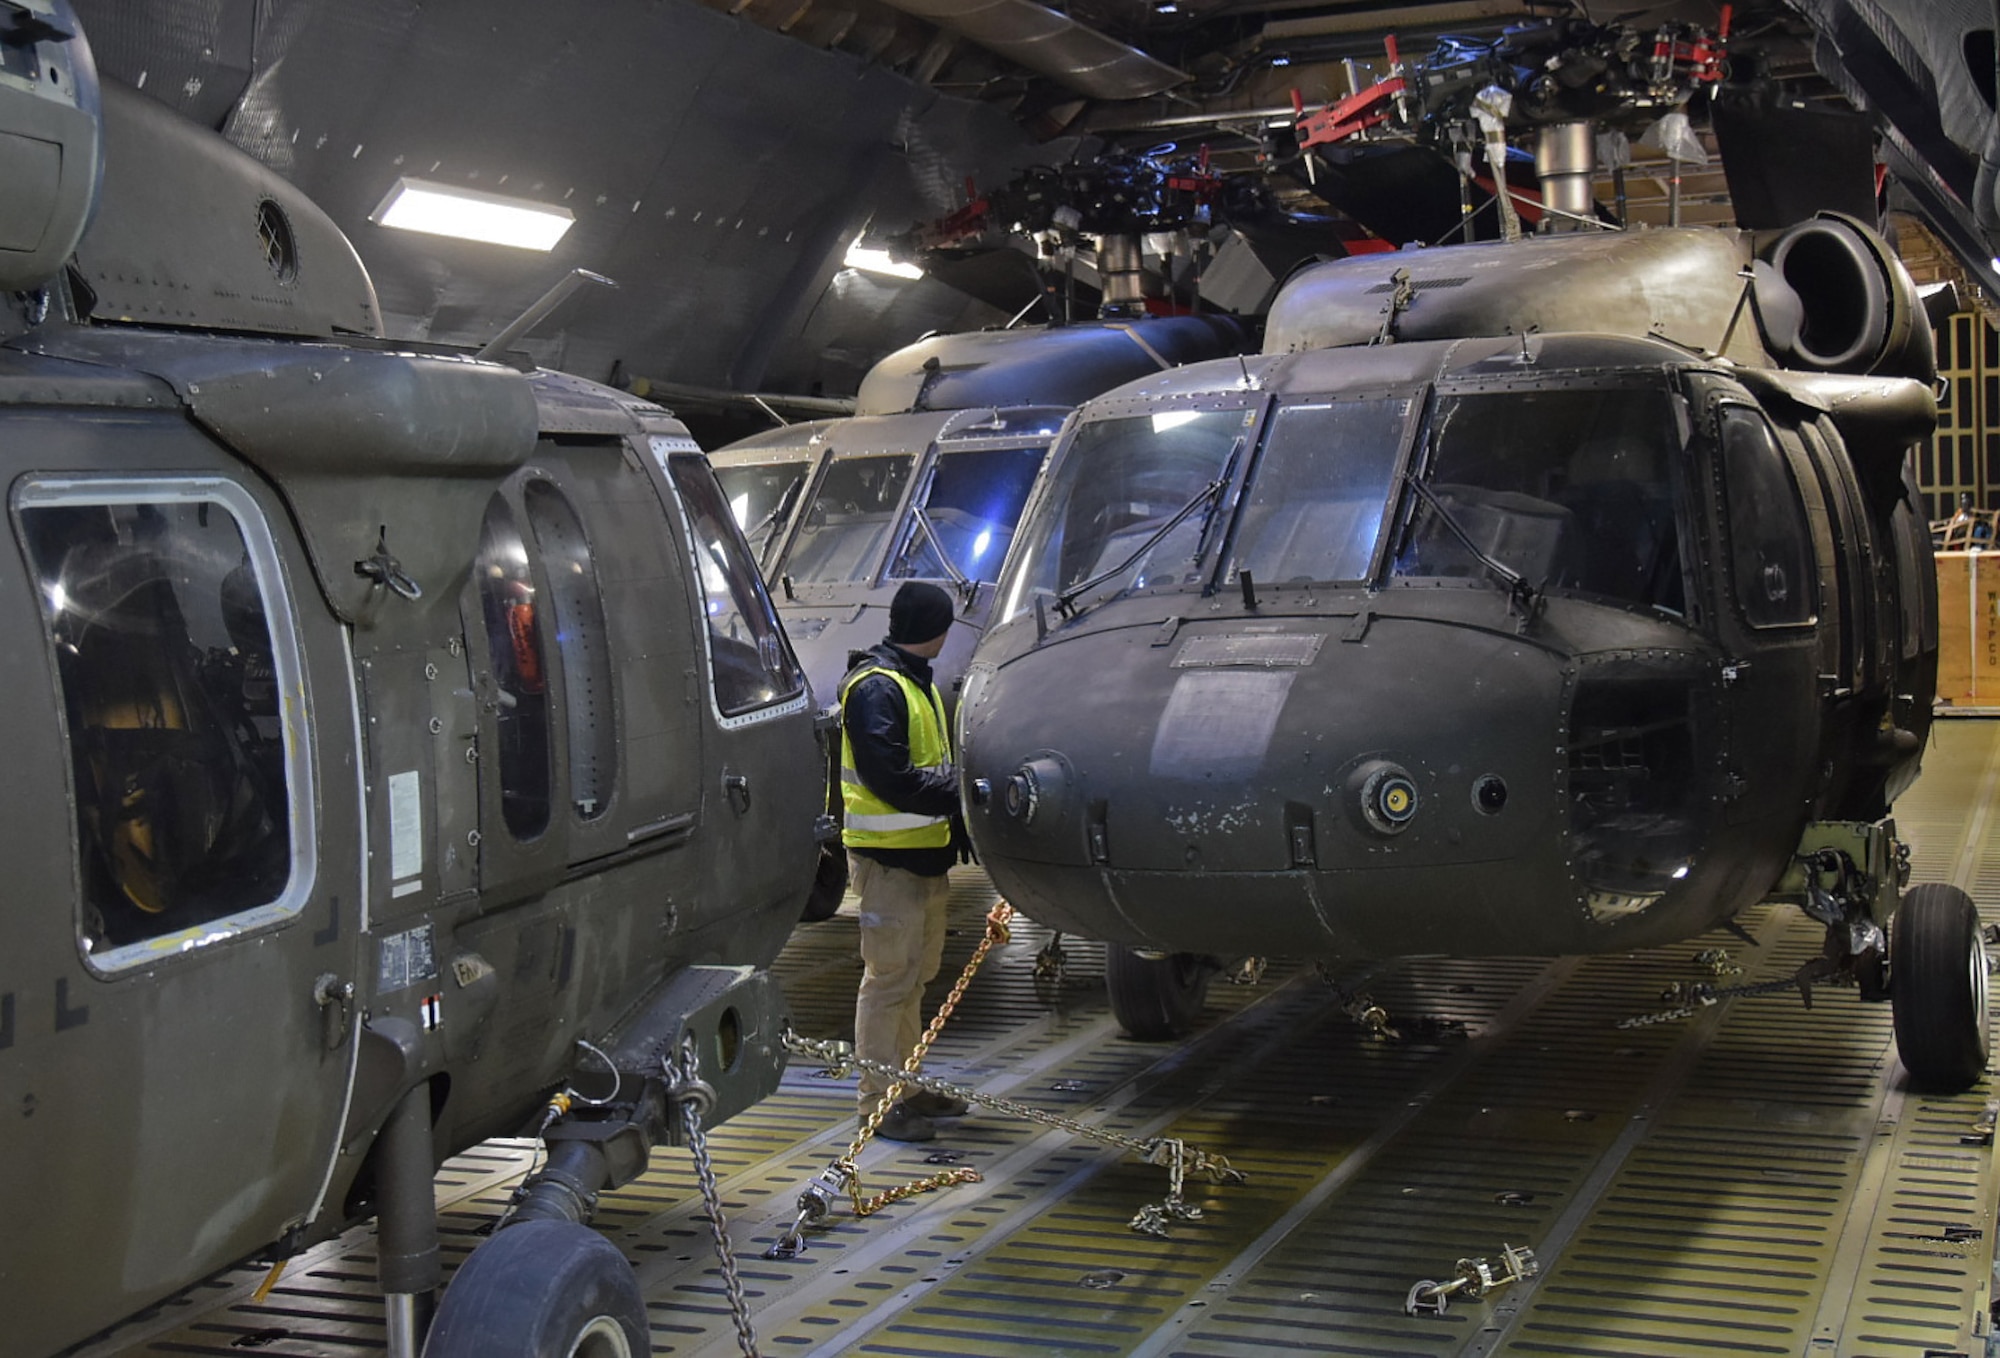 Three U.S. Army UH-60 Blackhawk helicopters belonging to the 10th Combat Aviation Brigade from Ft. Drum, N.Y. are secured and readied for transport on an Air Mobility Command C-5M Super Galaxy on Feb., 27, 2017.  The helicopters and 22 Army Soldiers were flown by Air Force Reserve Command's 68th Airlift Squadron to Riga, Latvia as part of Operation Atlantic Resolve. (U.S. Air Force photo/Tech. Sgt. Carlos J. Trevino)